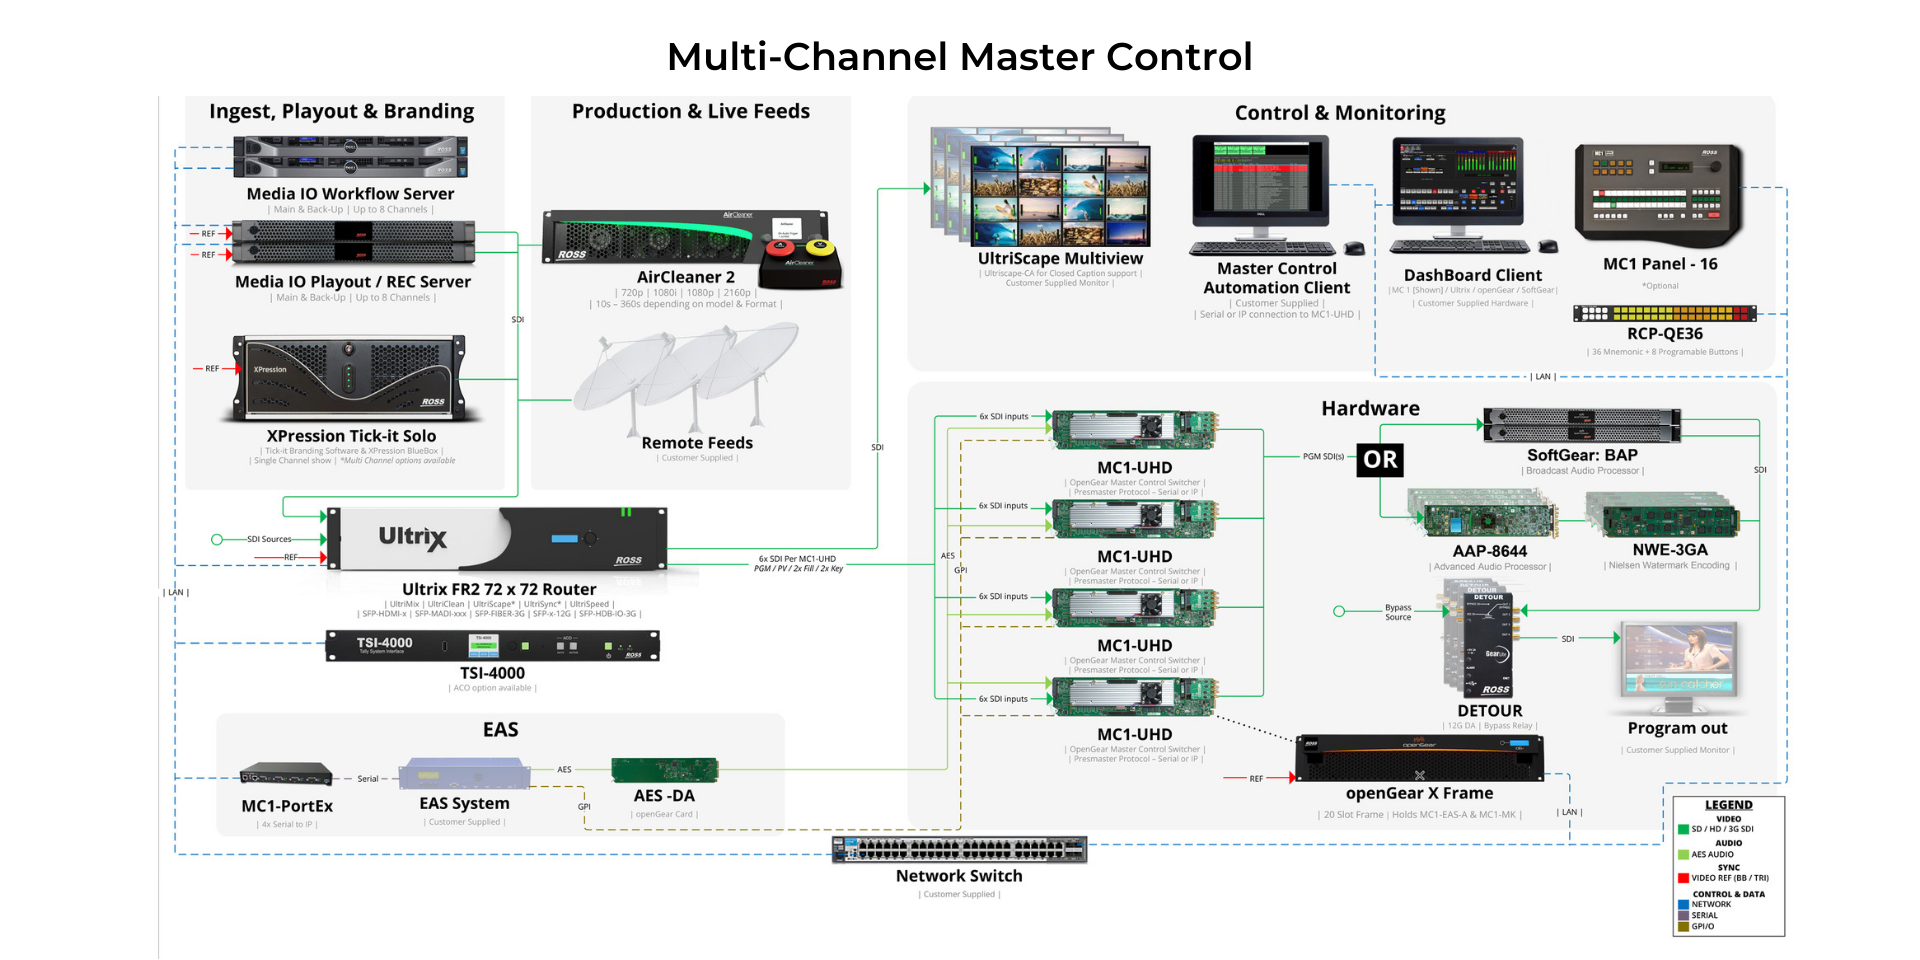 ROSS MASTER CONTROL SOLUTION - Multi-Channel Master Control